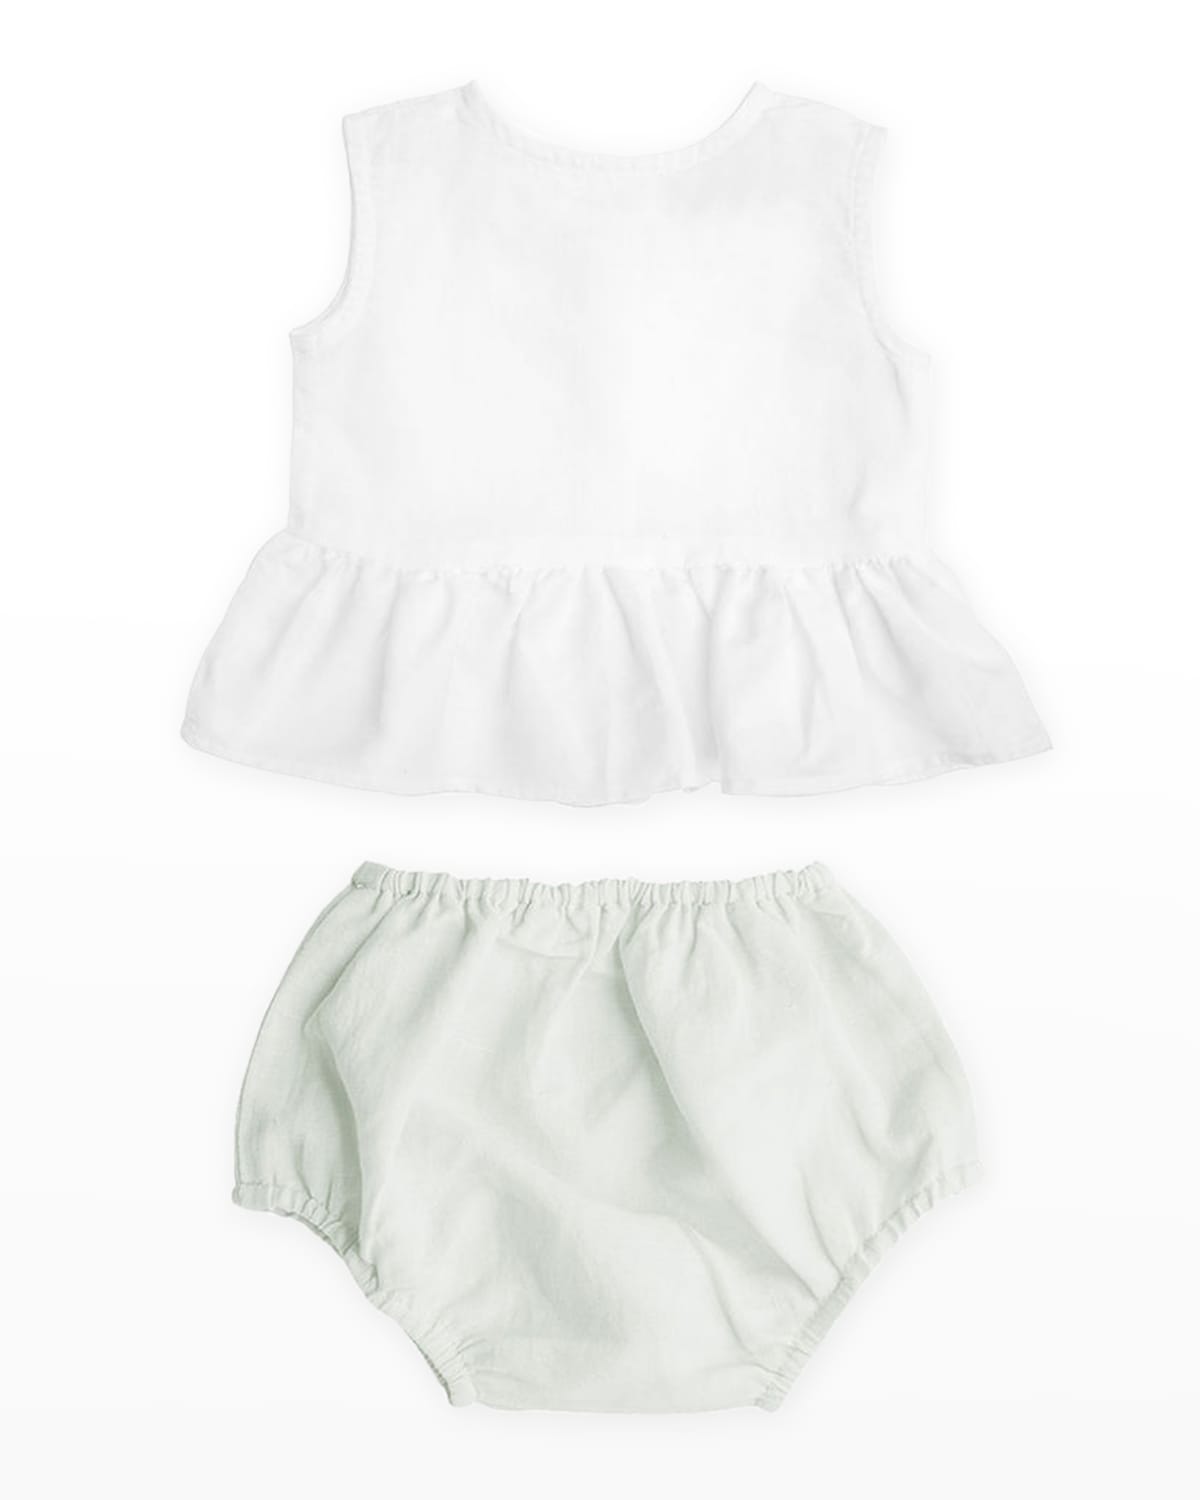 Louelle Kids' Girl's Peplum Top W/ Bloomers In French Grey 2